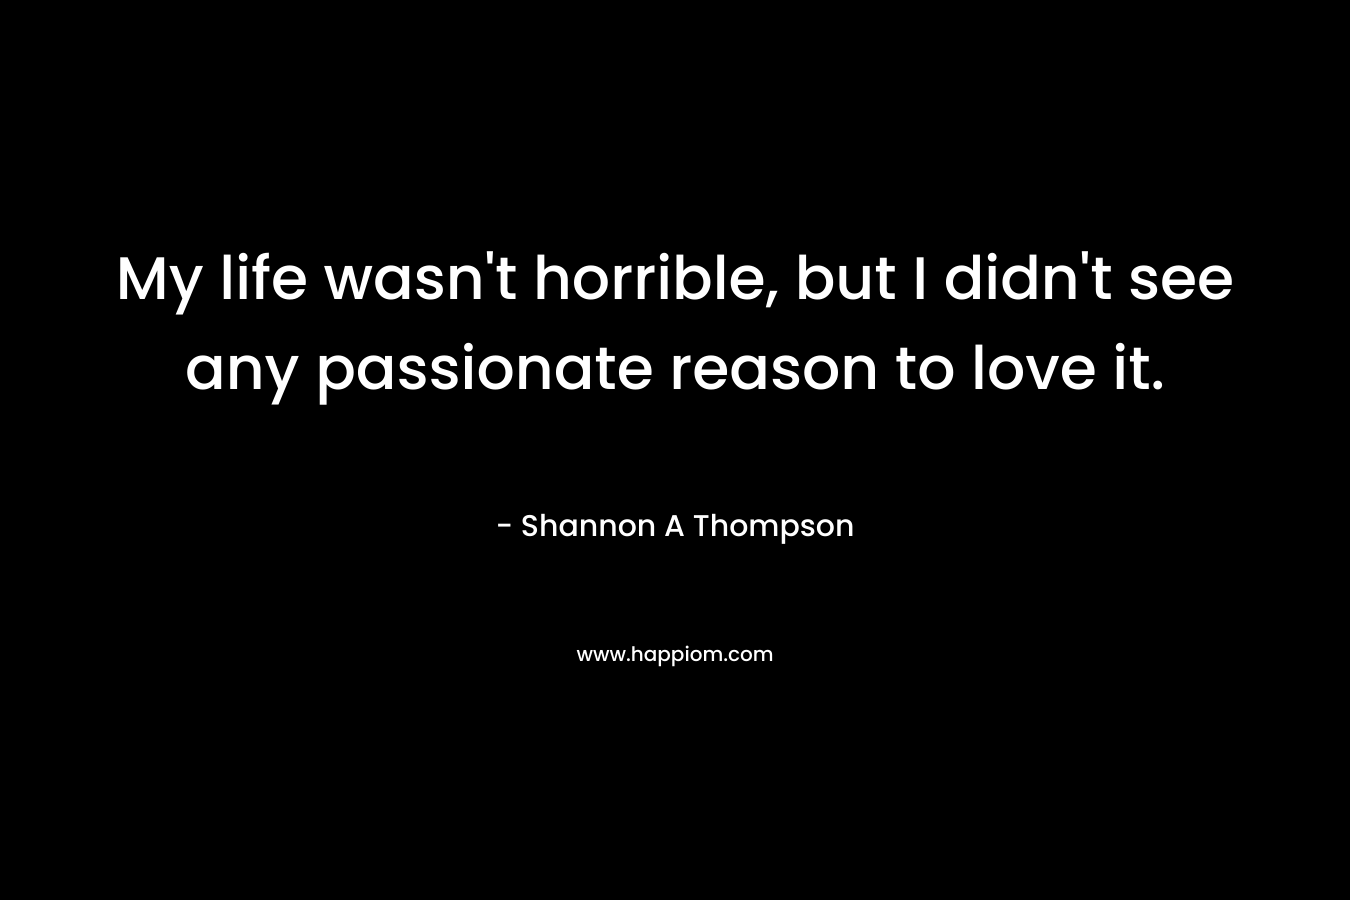 My life wasn't horrible, but I didn't see any passionate reason to love it.